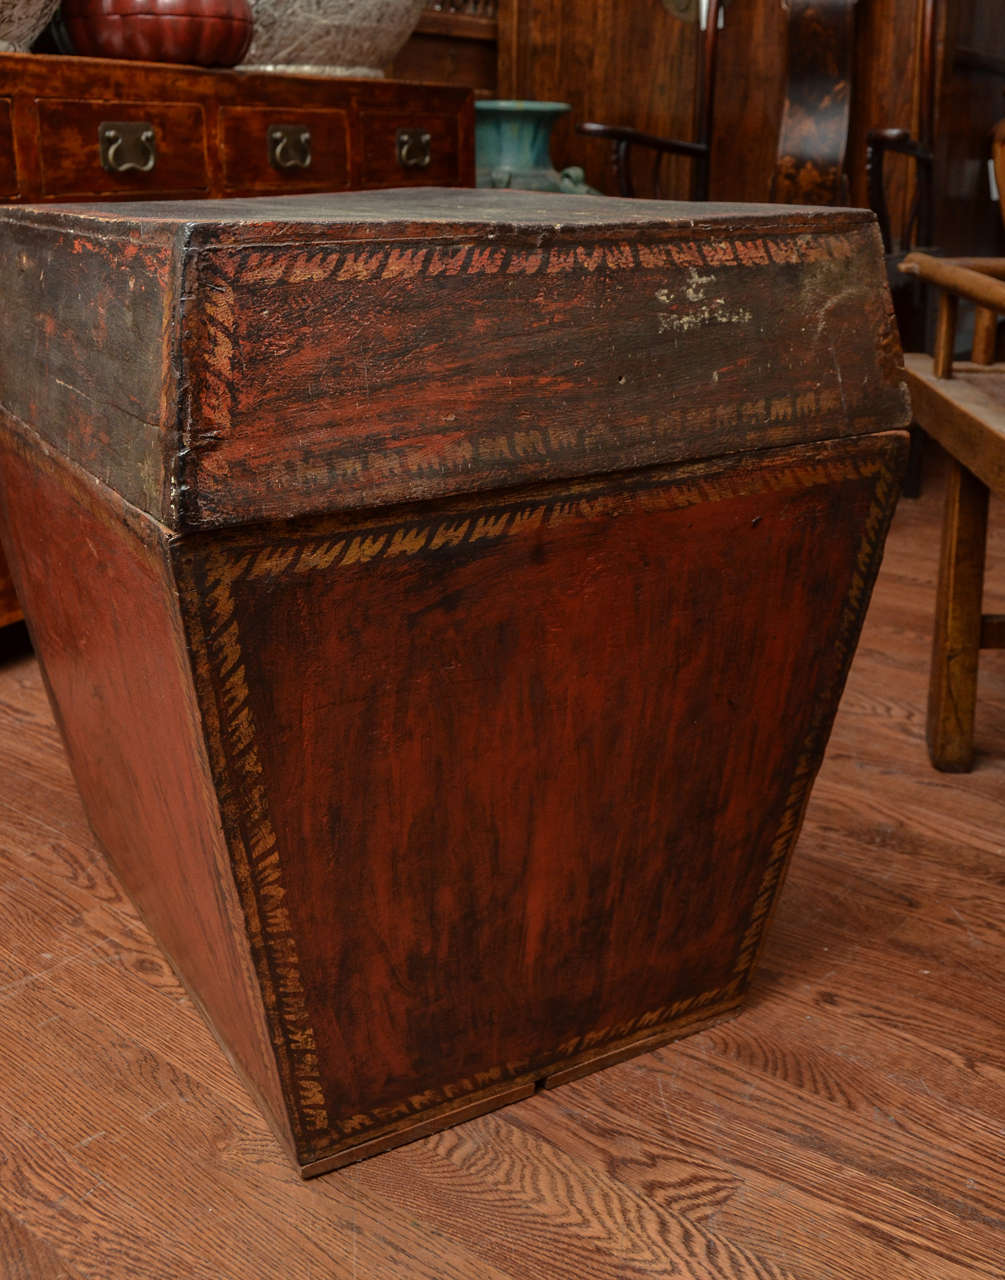 Late 18th Century Burmese Temple Book Storage Trunk in Original Lacquer In Good Condition For Sale In East Hampton, NY